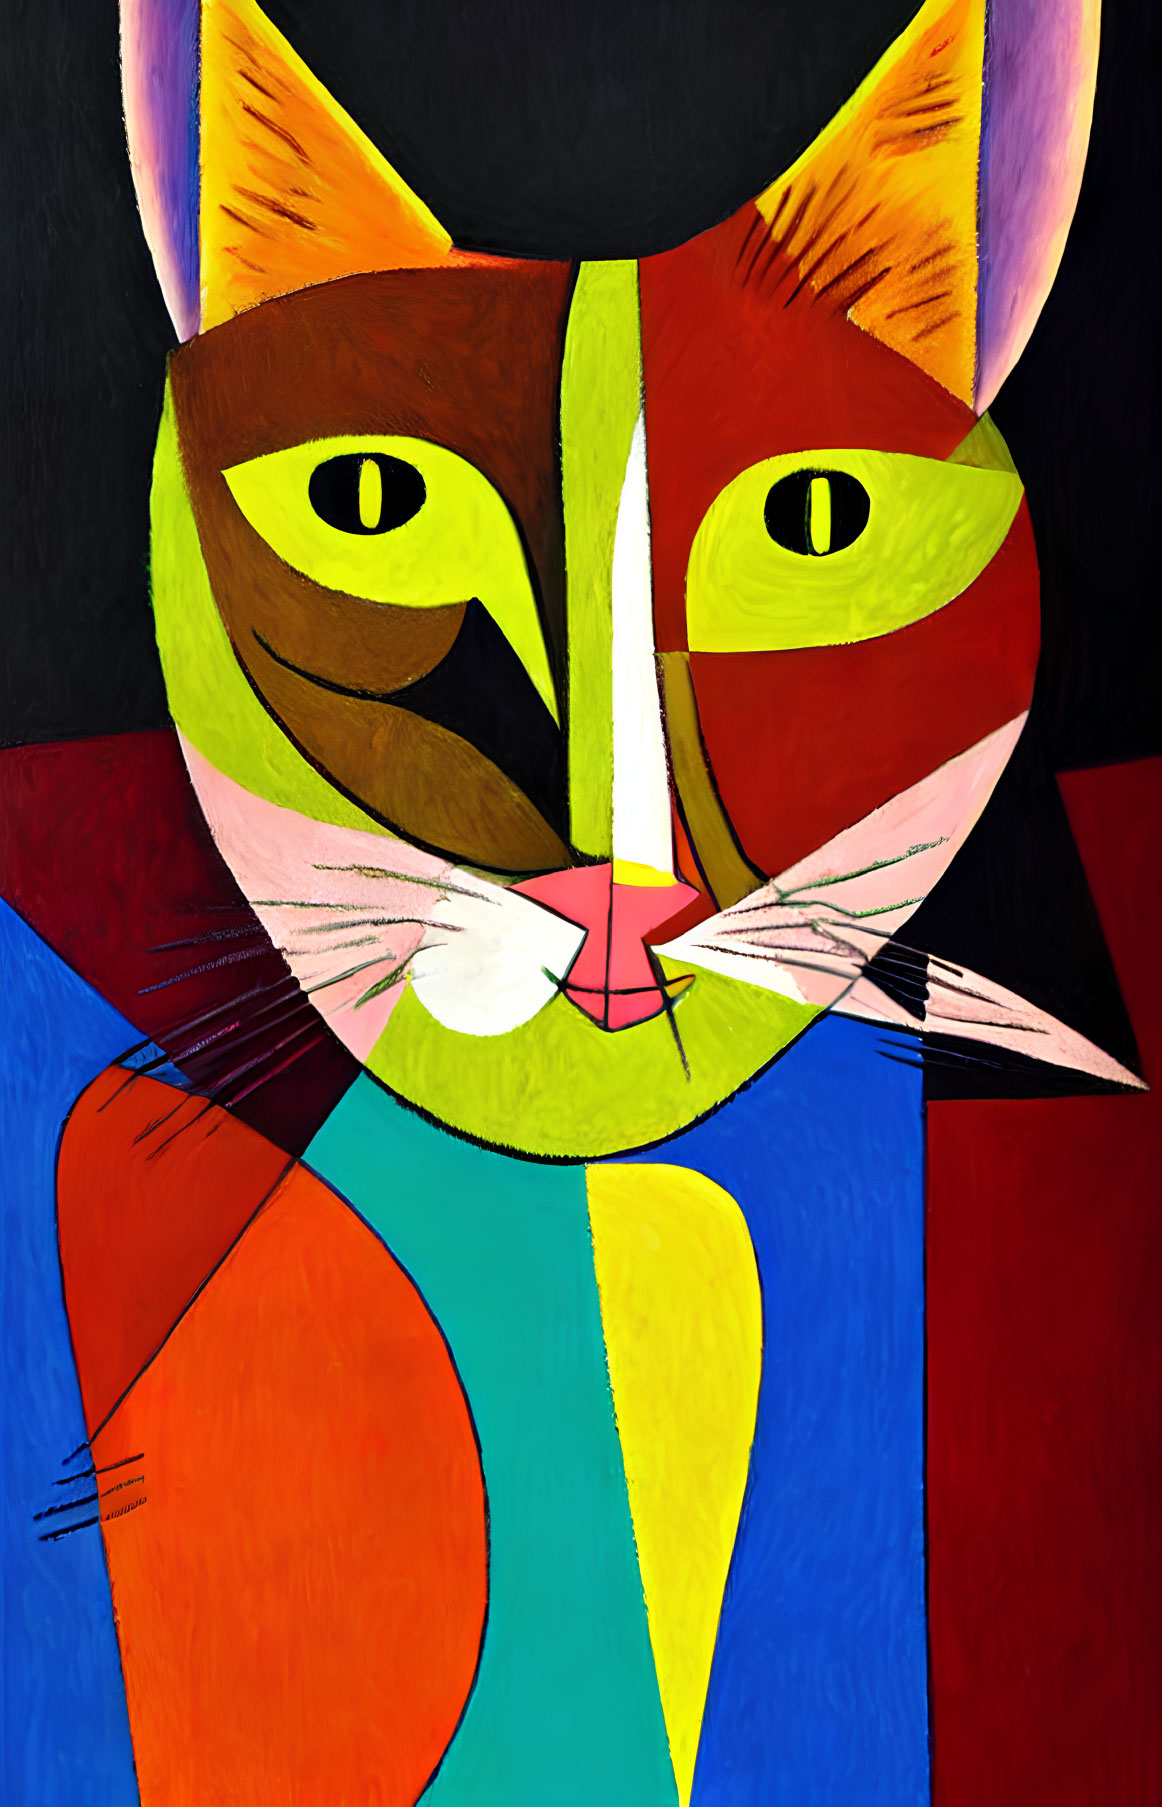 Vibrant abstract painting of stylized cat's face with geometric shapes